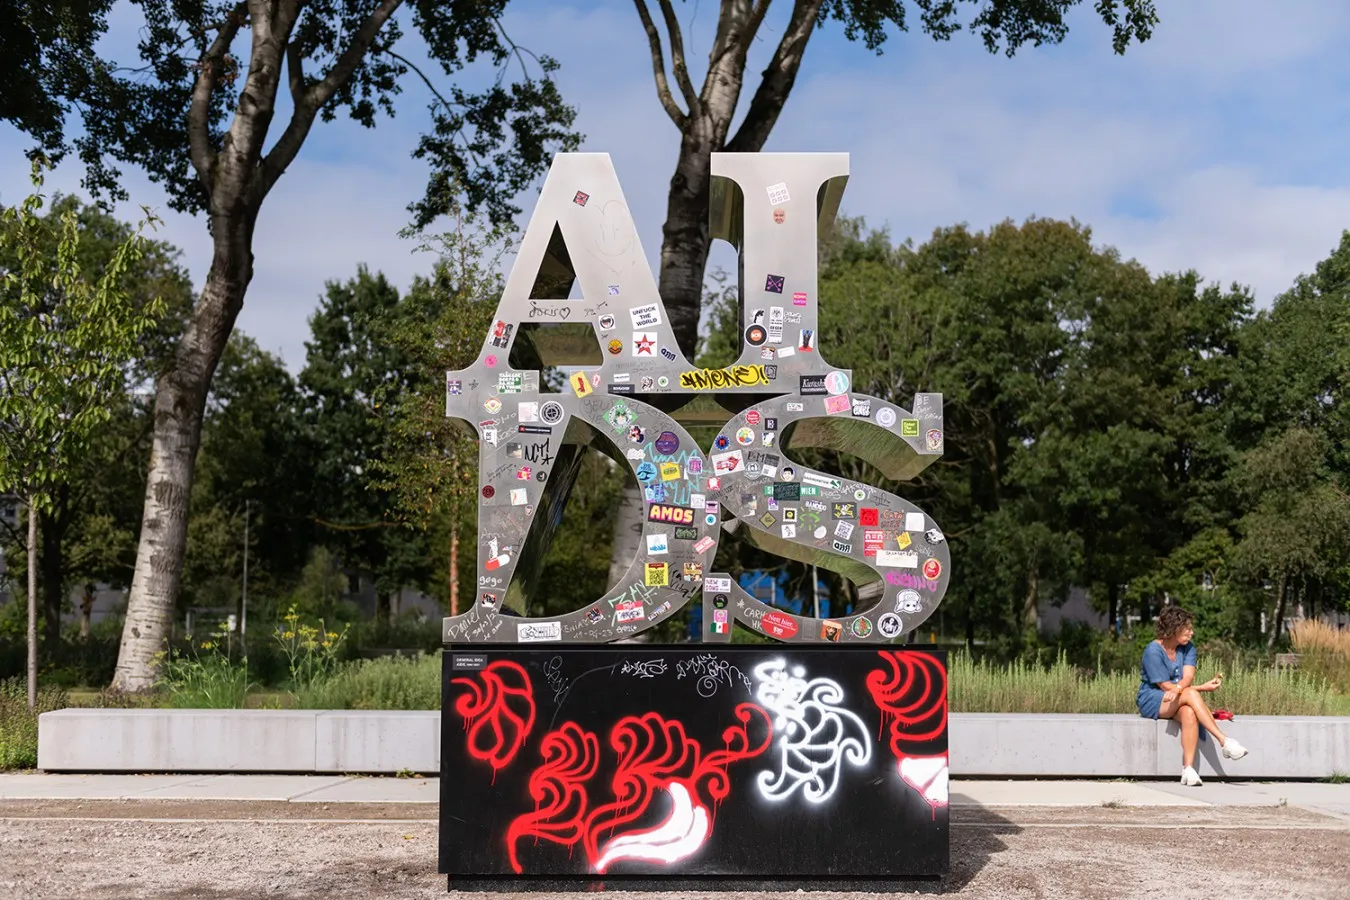 A and I letters on top of D and S silver metal letters (reads AIDS) adorned with stickers and other graffitis placed on a black pedestal in a park